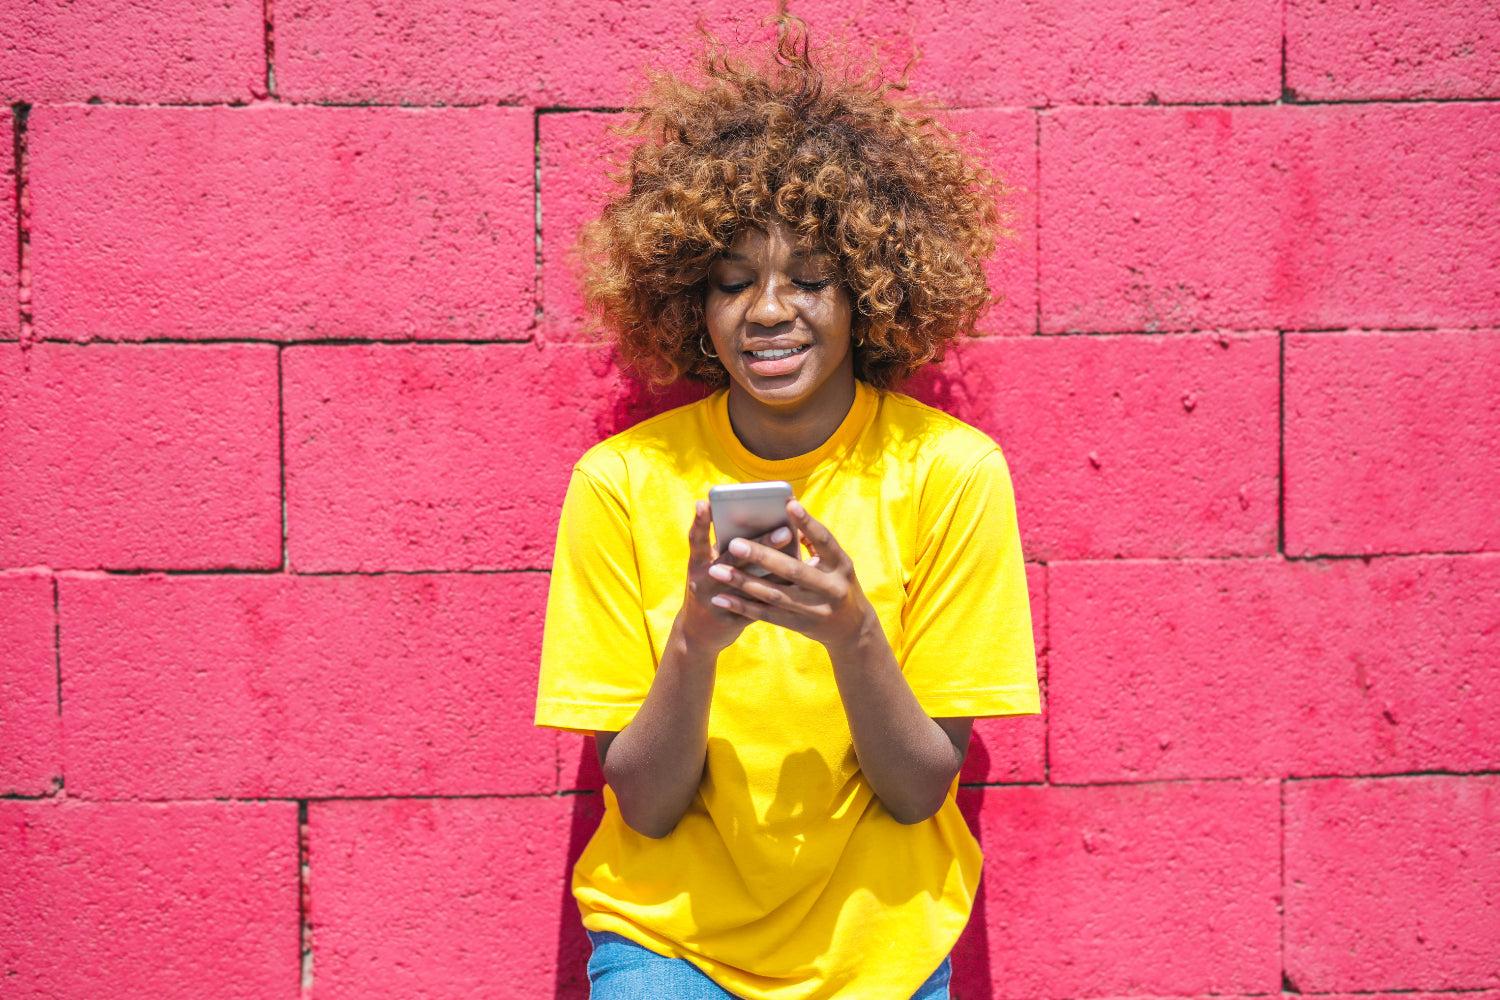 A woman leans on a pink brick wall using her phone